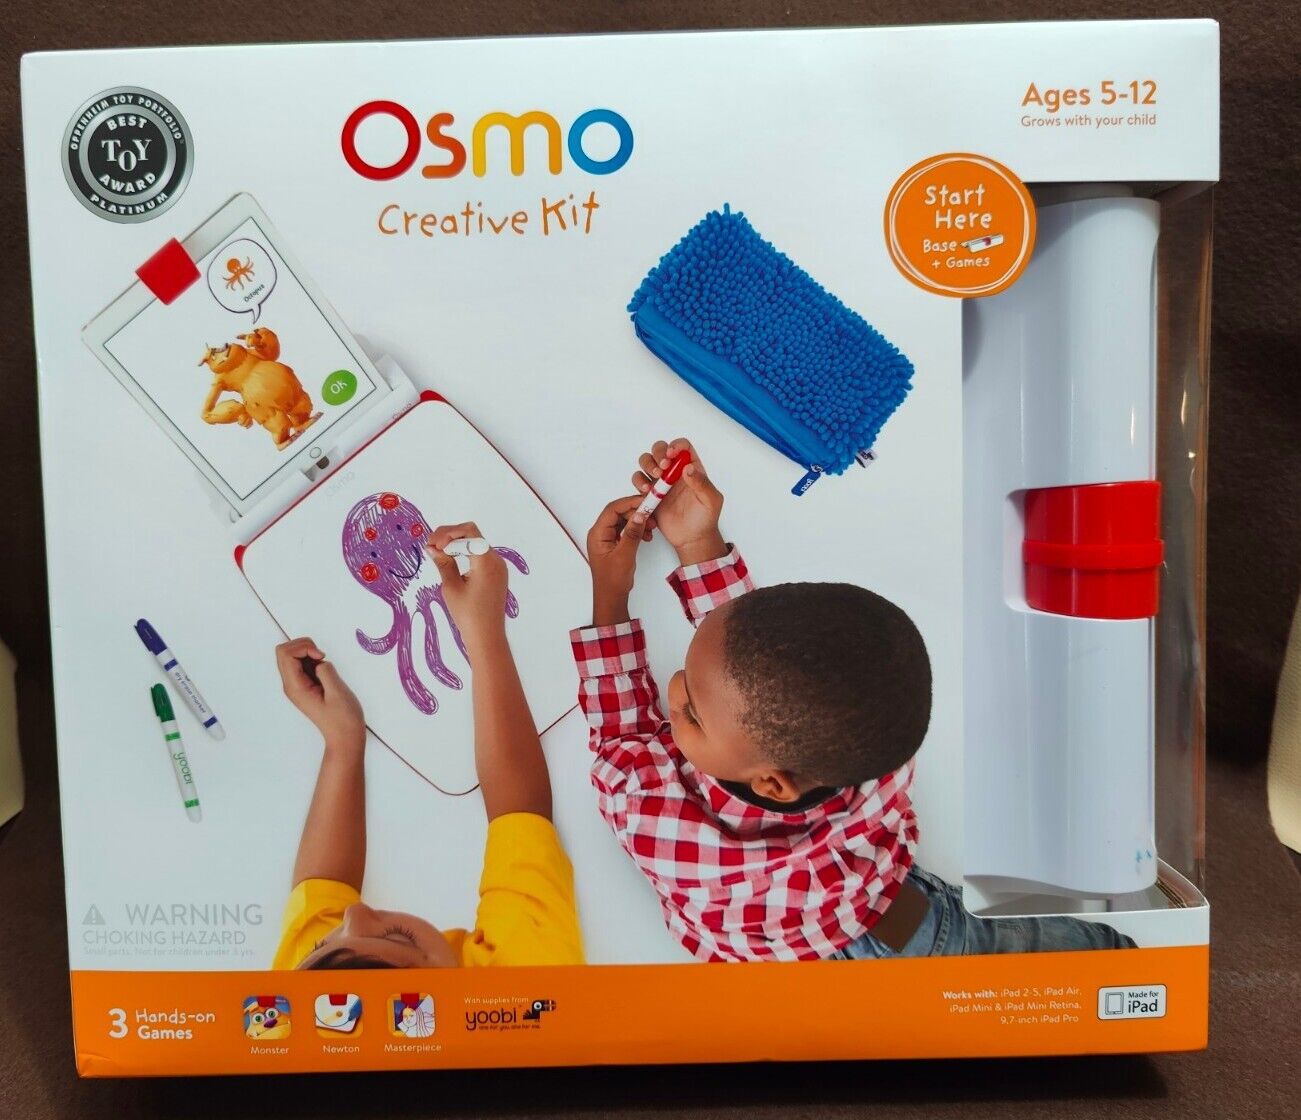 Osmo Creative Kit For iPad Ages 5-12 With 3 Hands-on Games